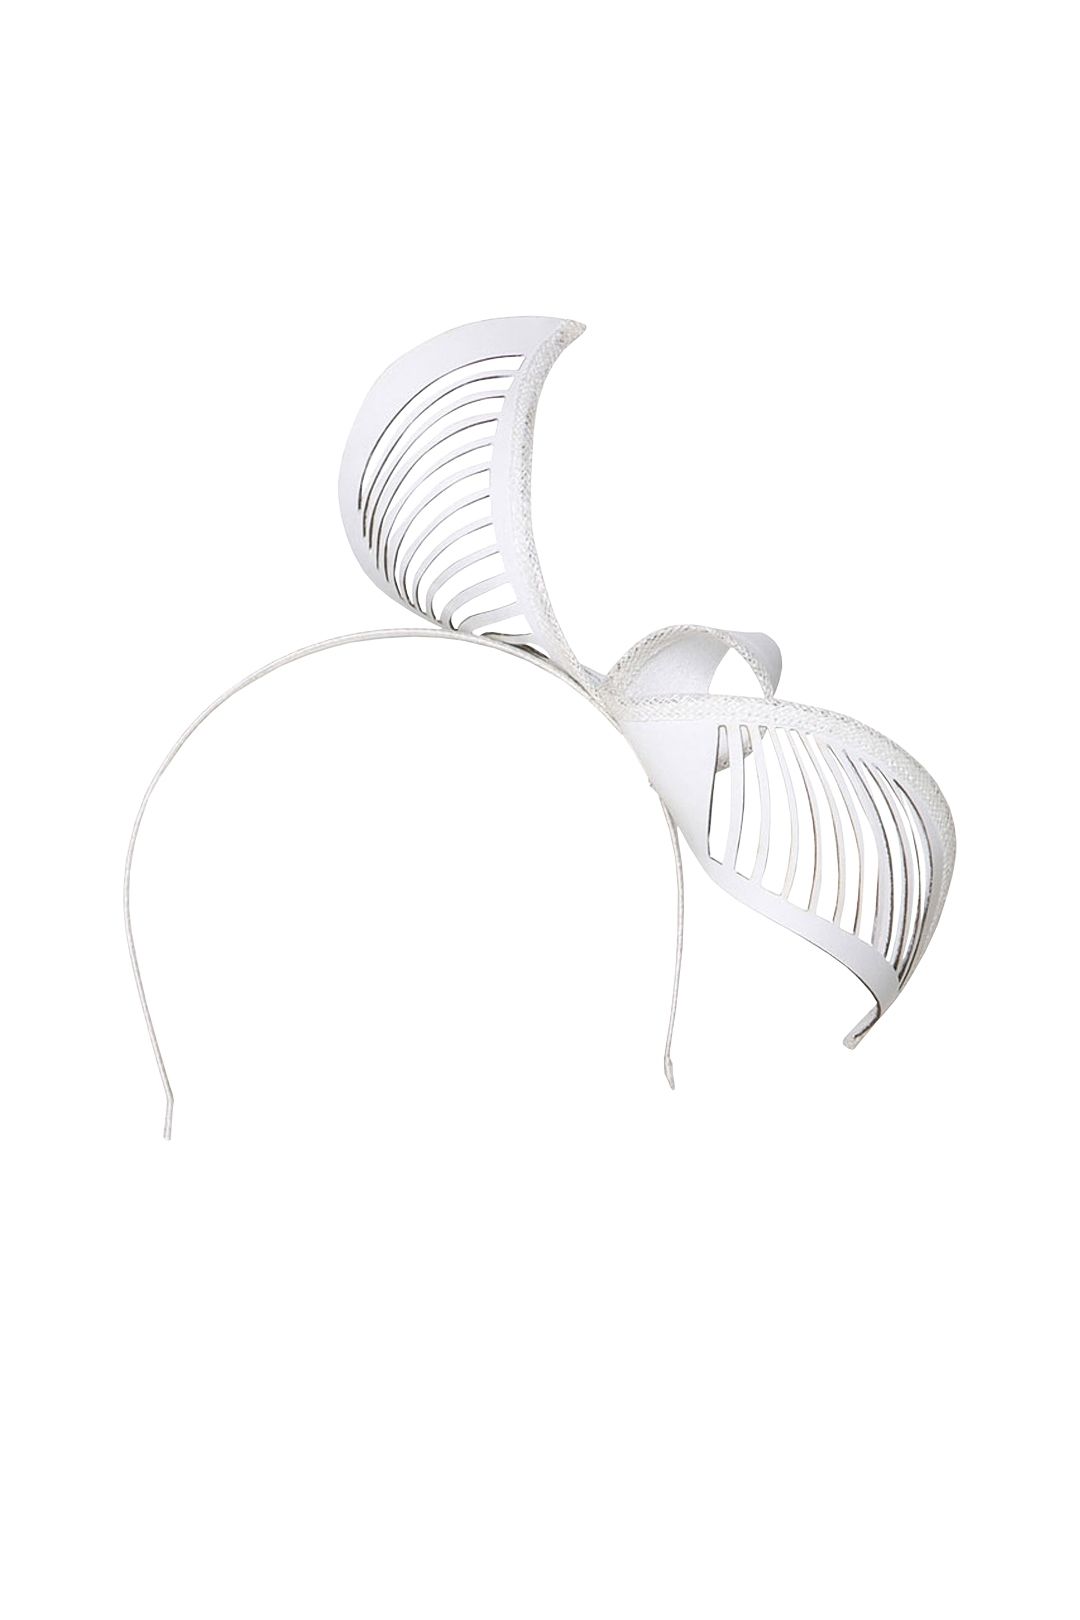 Studio Aniss - Bowline Crown - White - Front